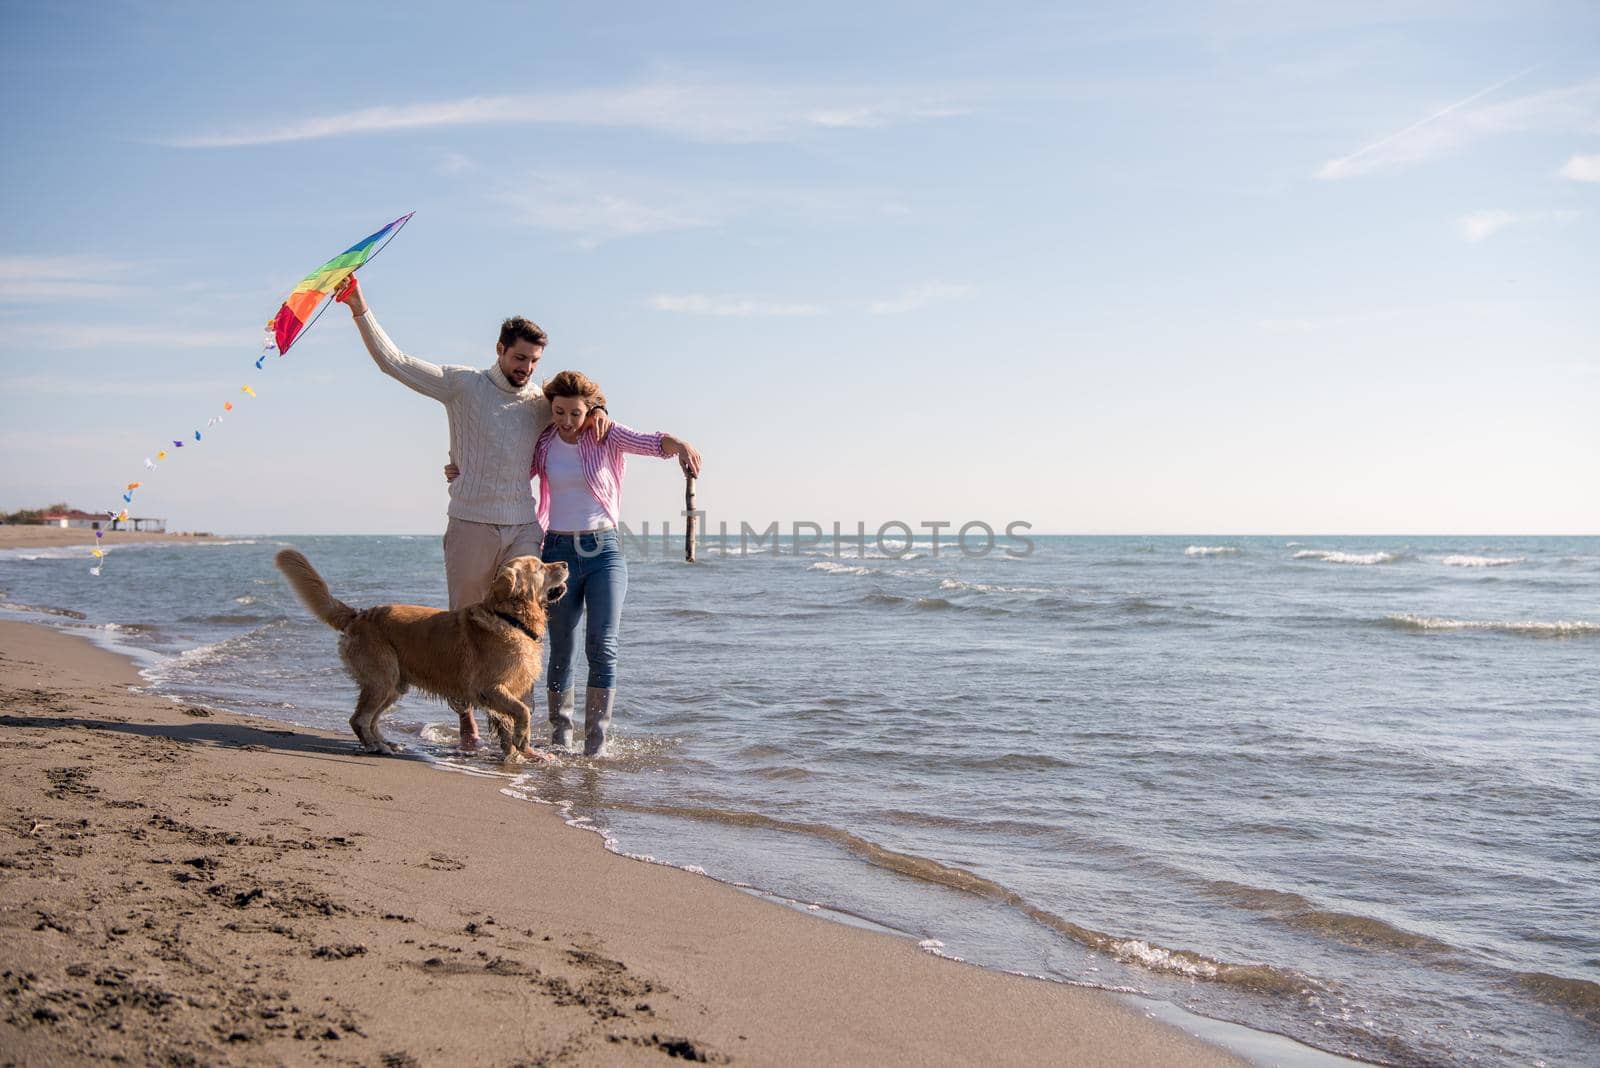 Young Couple having fun playing with a dog and Kite on the beach at autumn day